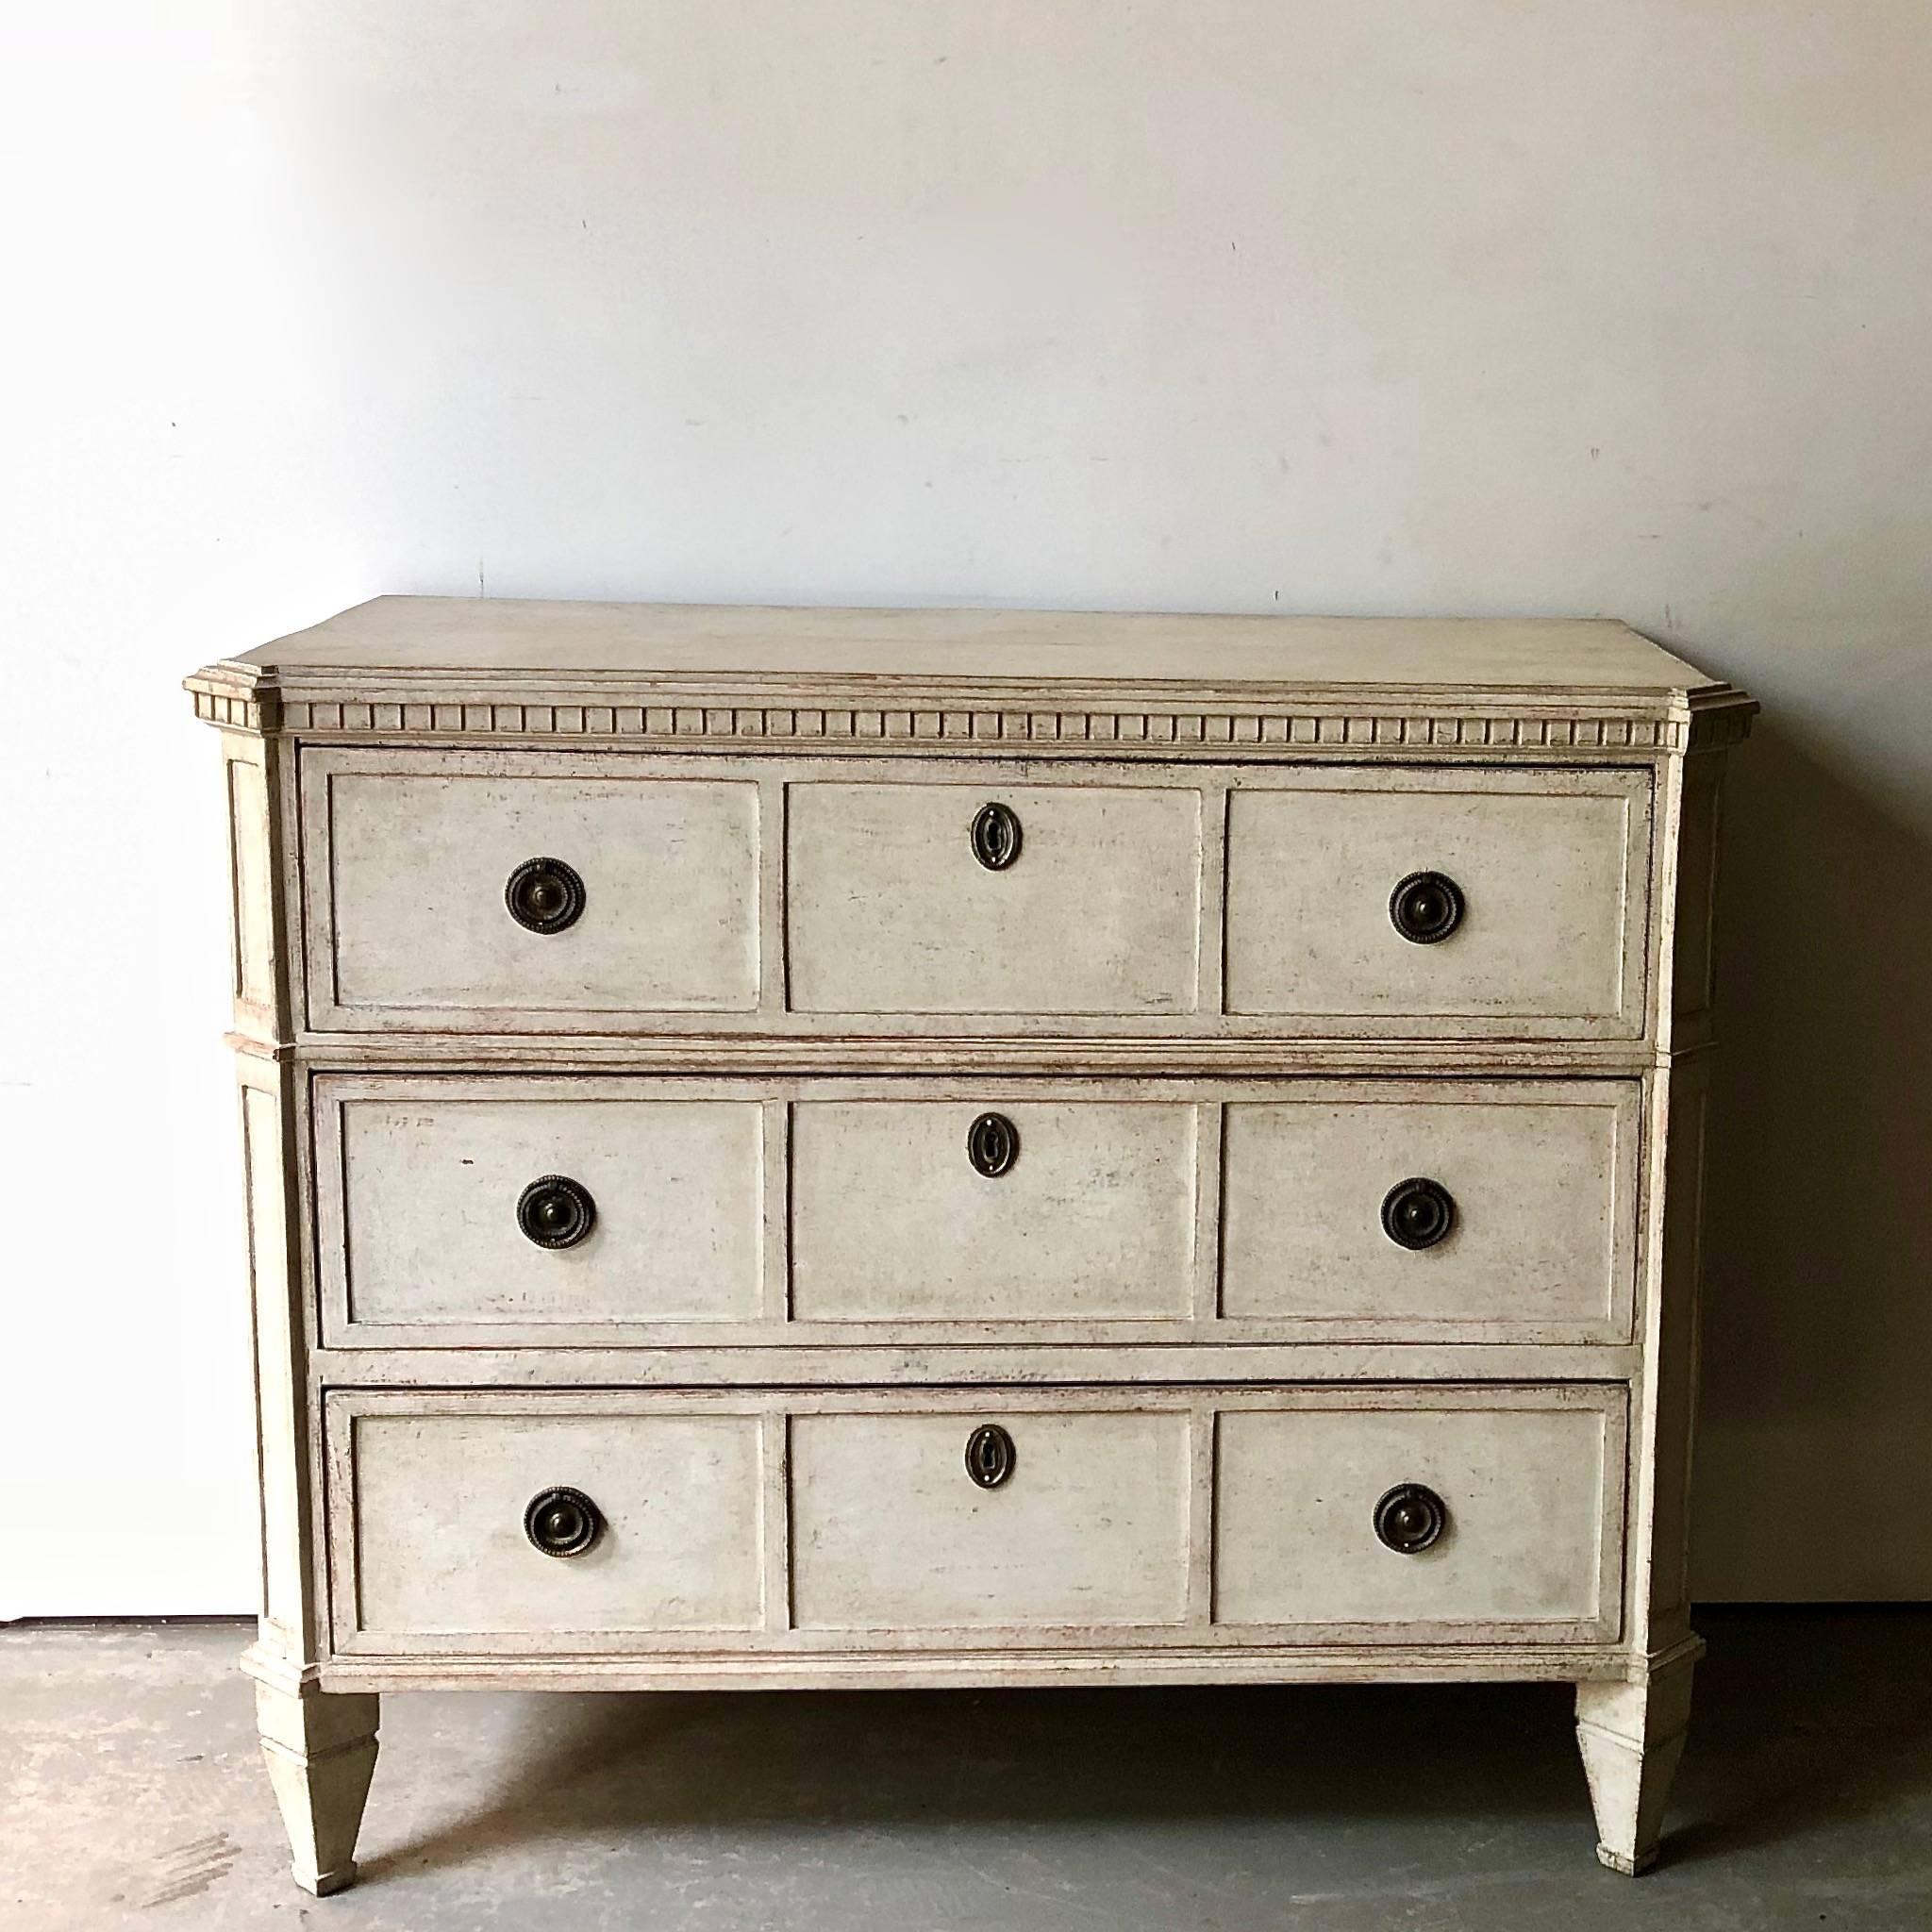 Early 19th century Swedish chest of three drawers with raised panel drawer fronts, canted corners and dentil moldings under the shaped top.
Sweden, circa 1810.
Surprising pieces and objects, authentic, decorative and rare items. Discover them all.